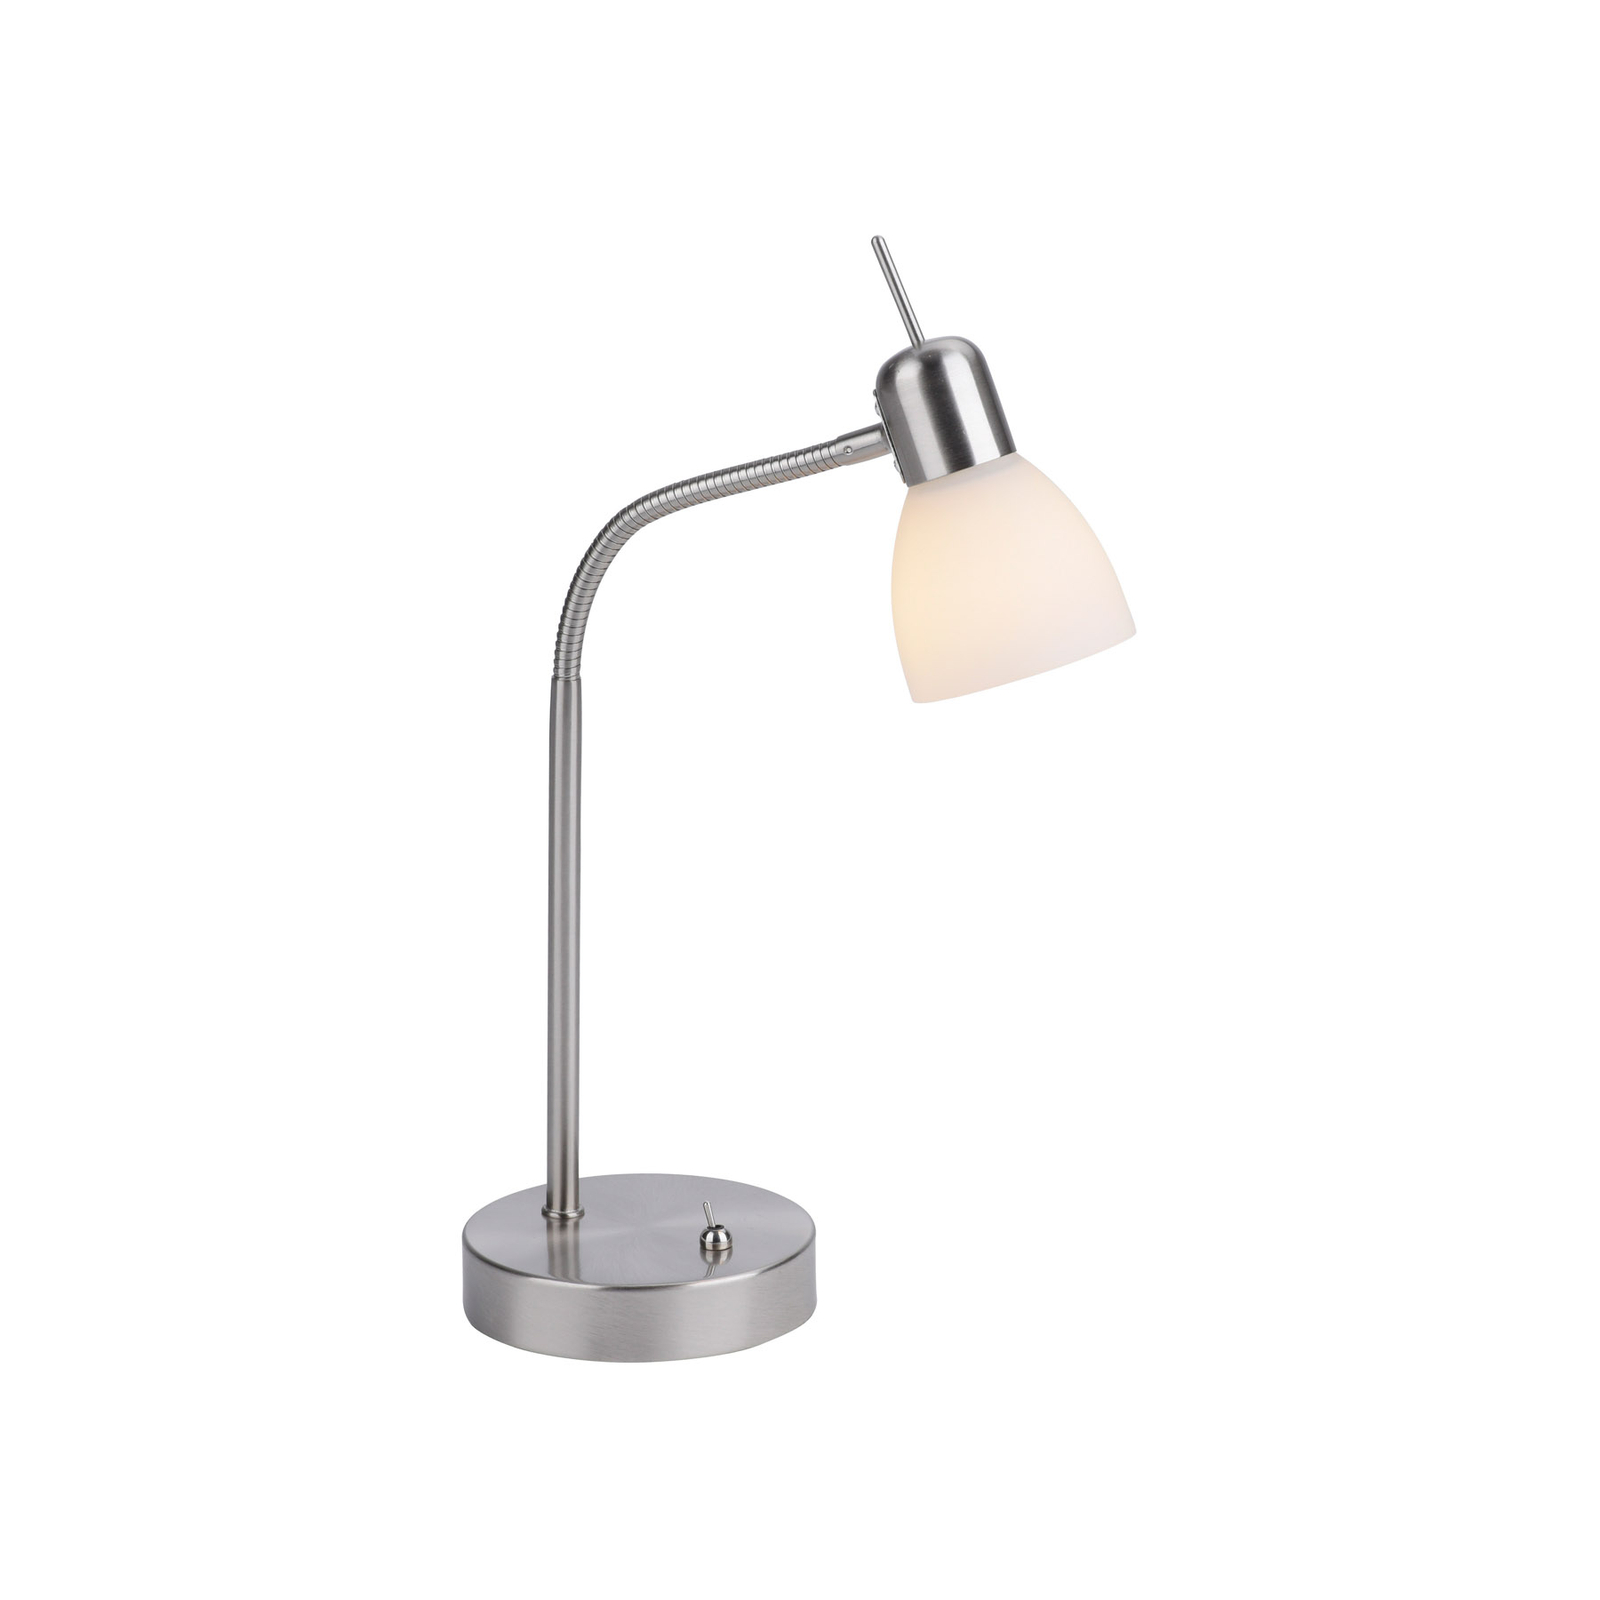 Karo table lamp with flexible arm